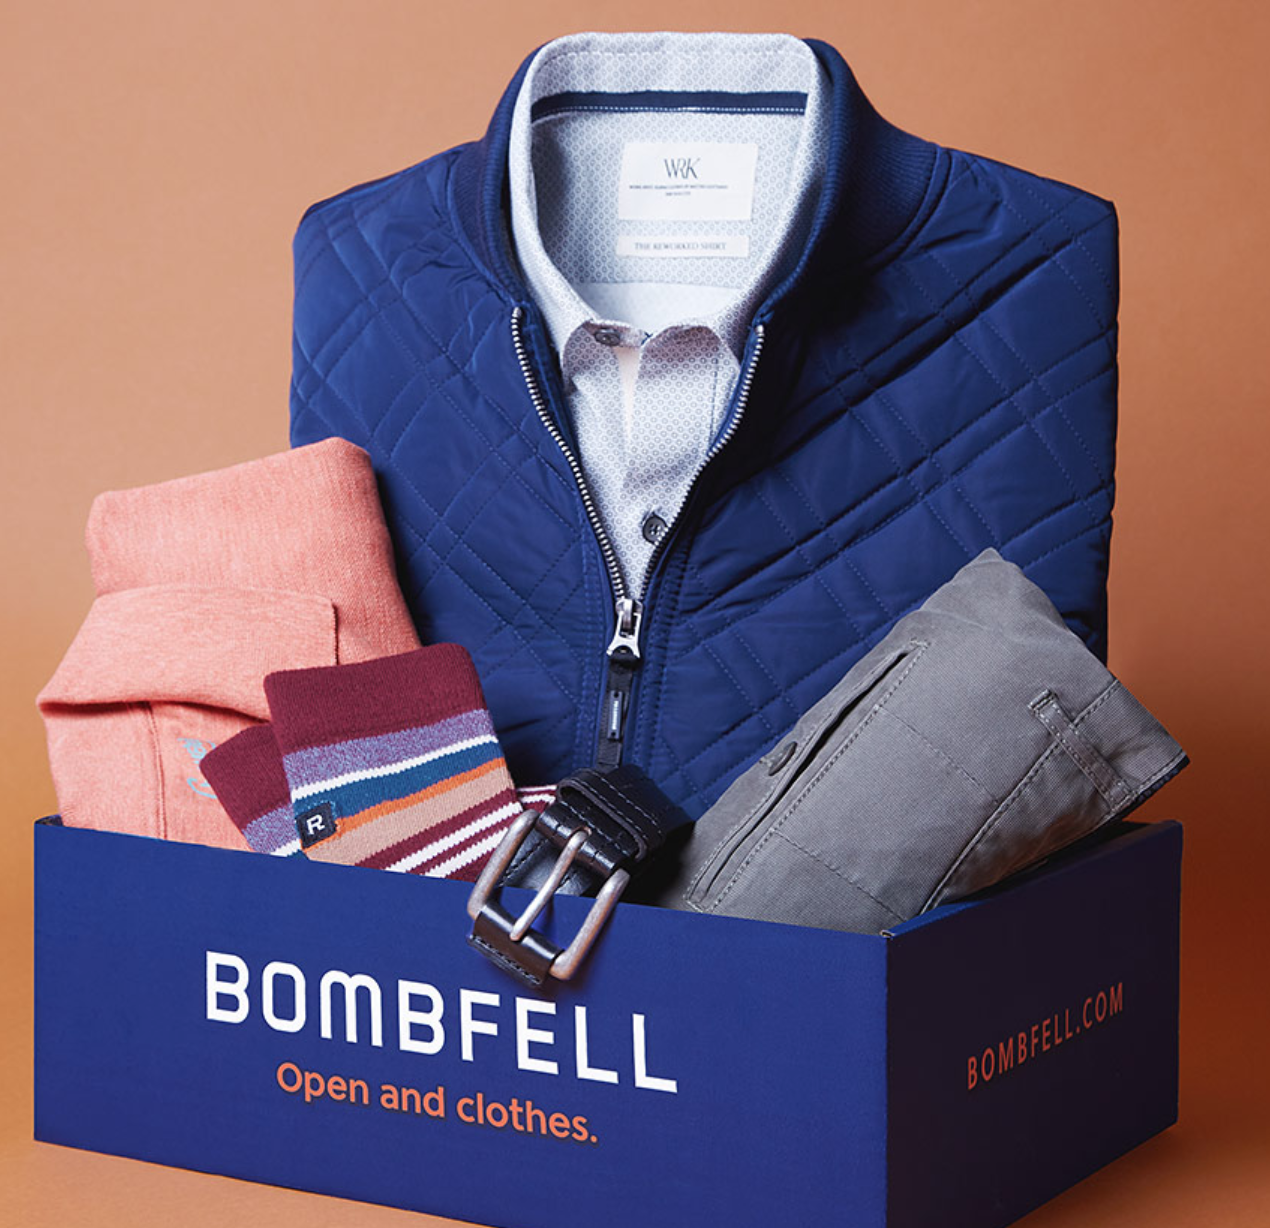 Bombfell Men’s Clothing Box Black Friday Deal – $30 Off First Purchase!